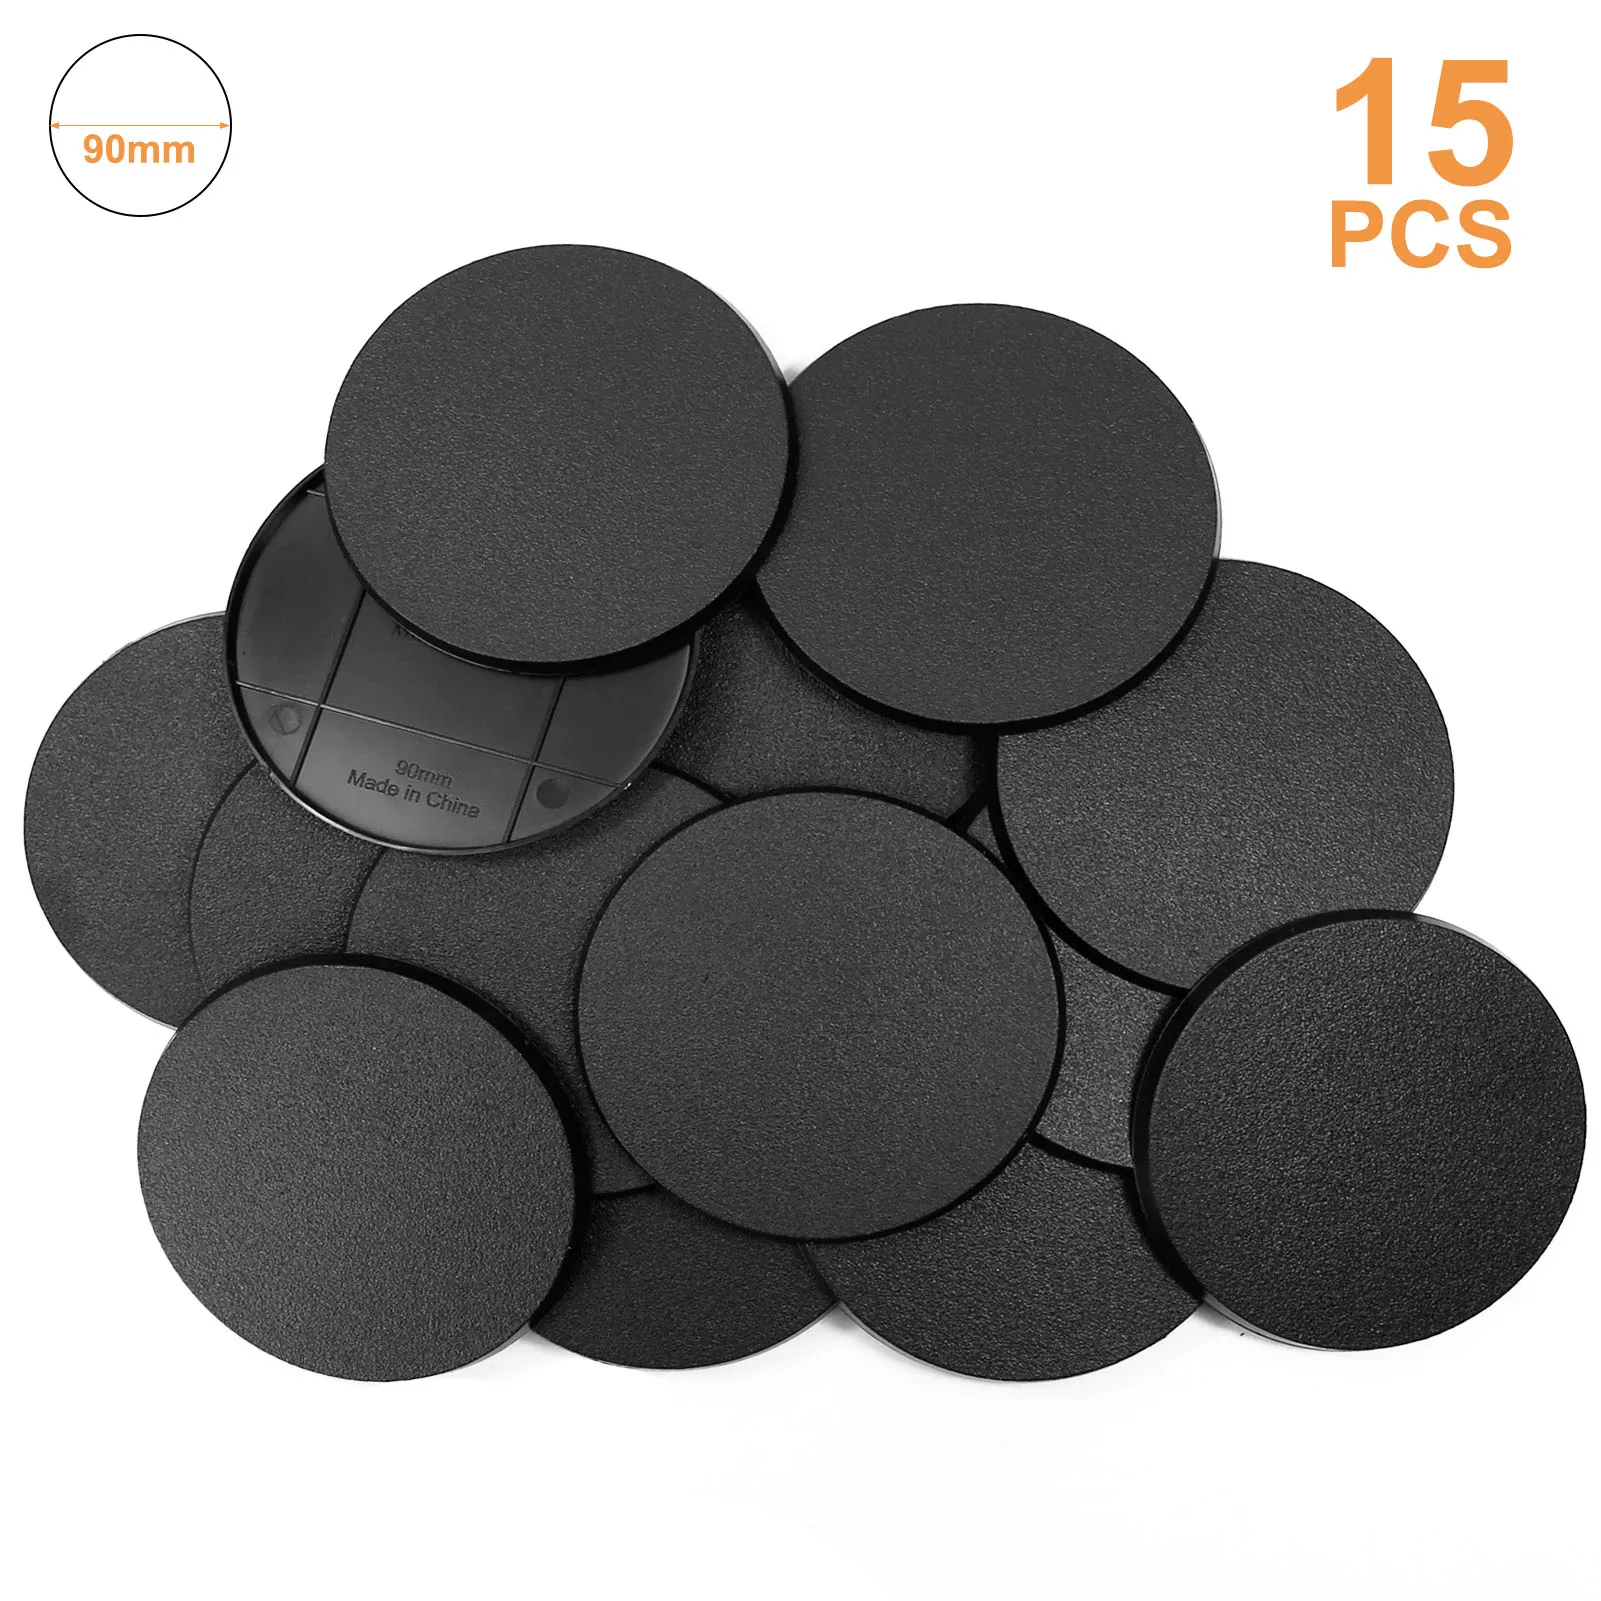 

Evemodel Miniature Bases 90mm Round Model Bases ABS Plastic for War Games Action Figure Table Games MB1190